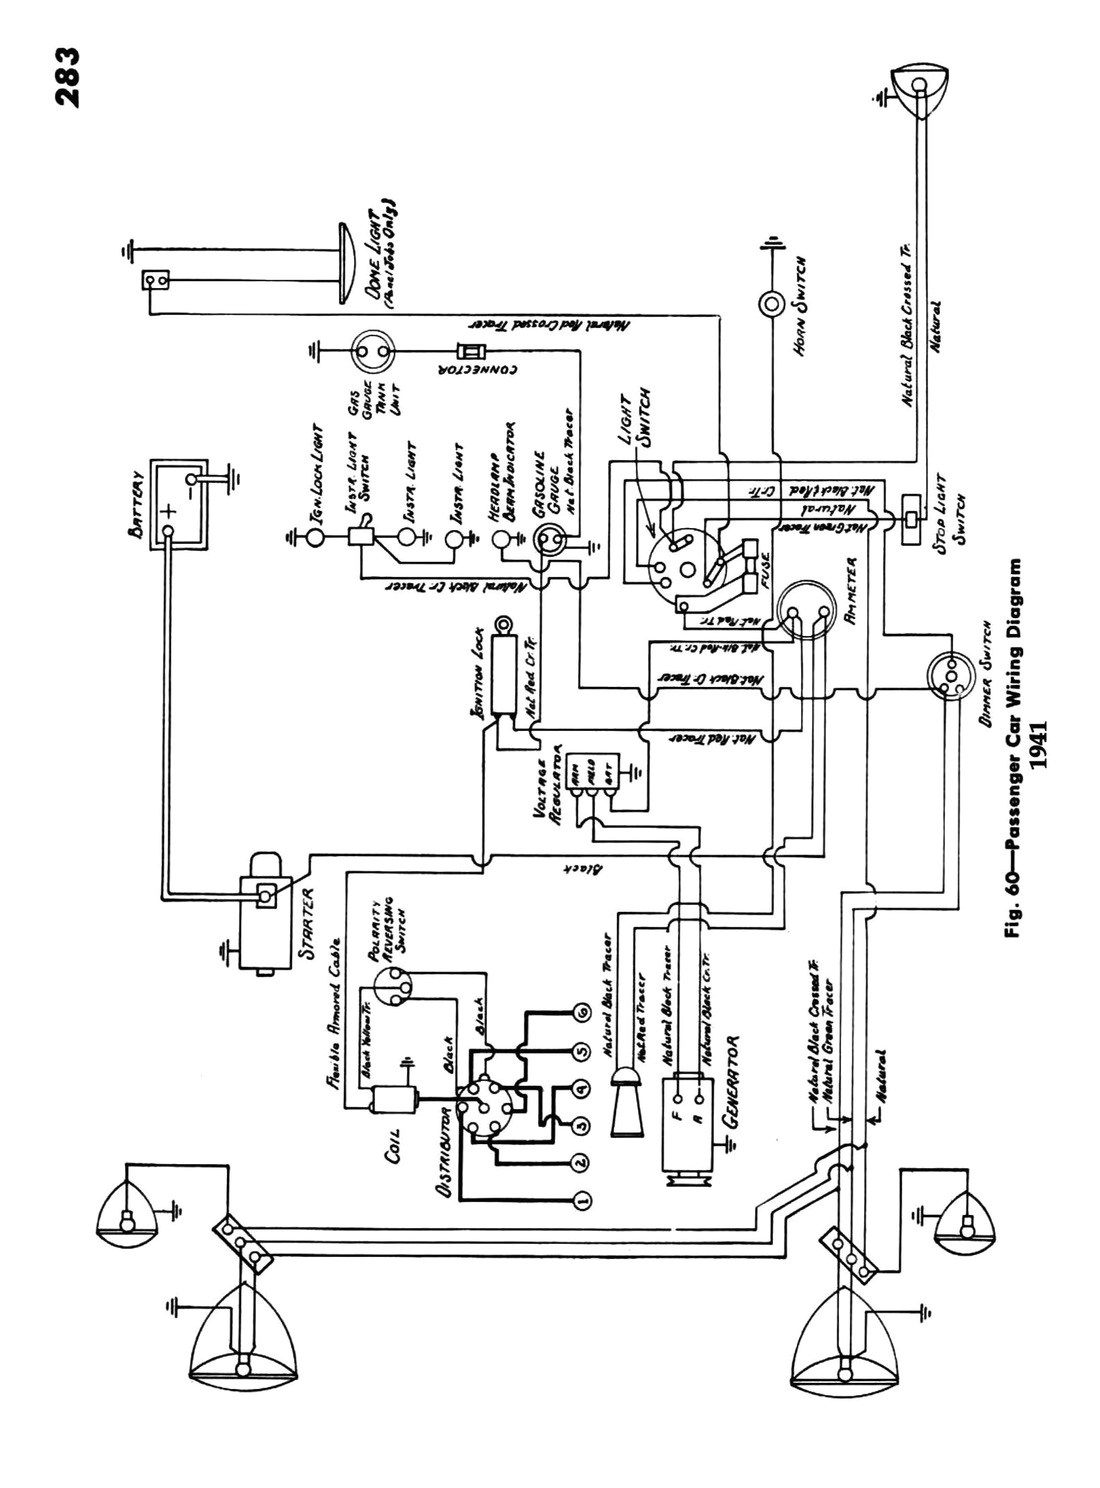 chevy wiring diagrams car passenger motor starter diagram single phase motor wiring diagram 3 208v hid ballast circuit forward reverse control magnetic starter switch three schematic dual 1100x1488 jpg